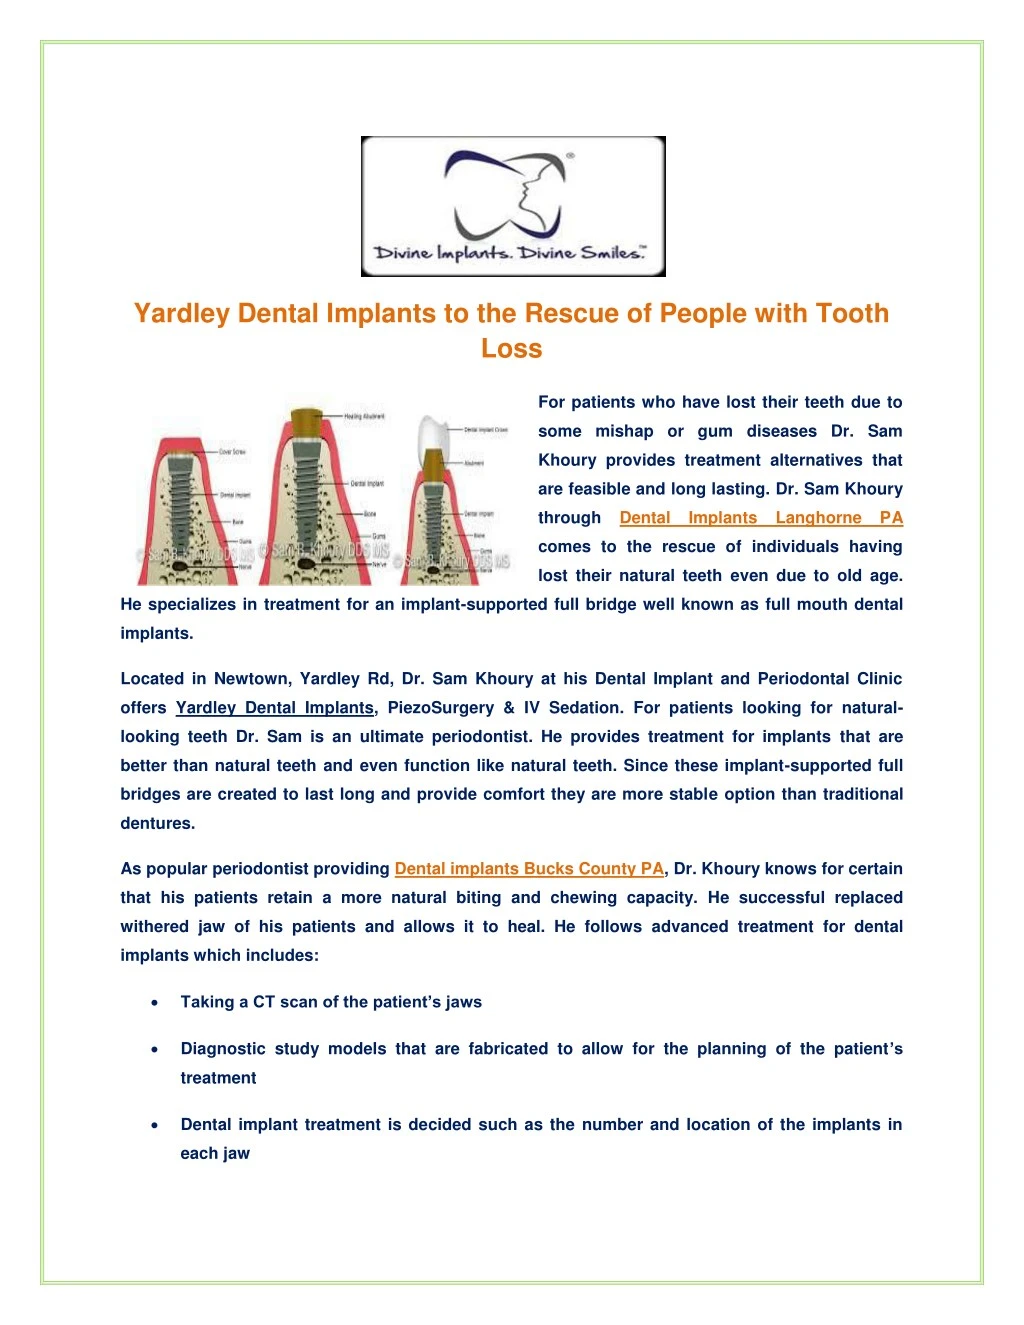 yardley dental implants to the rescue of people